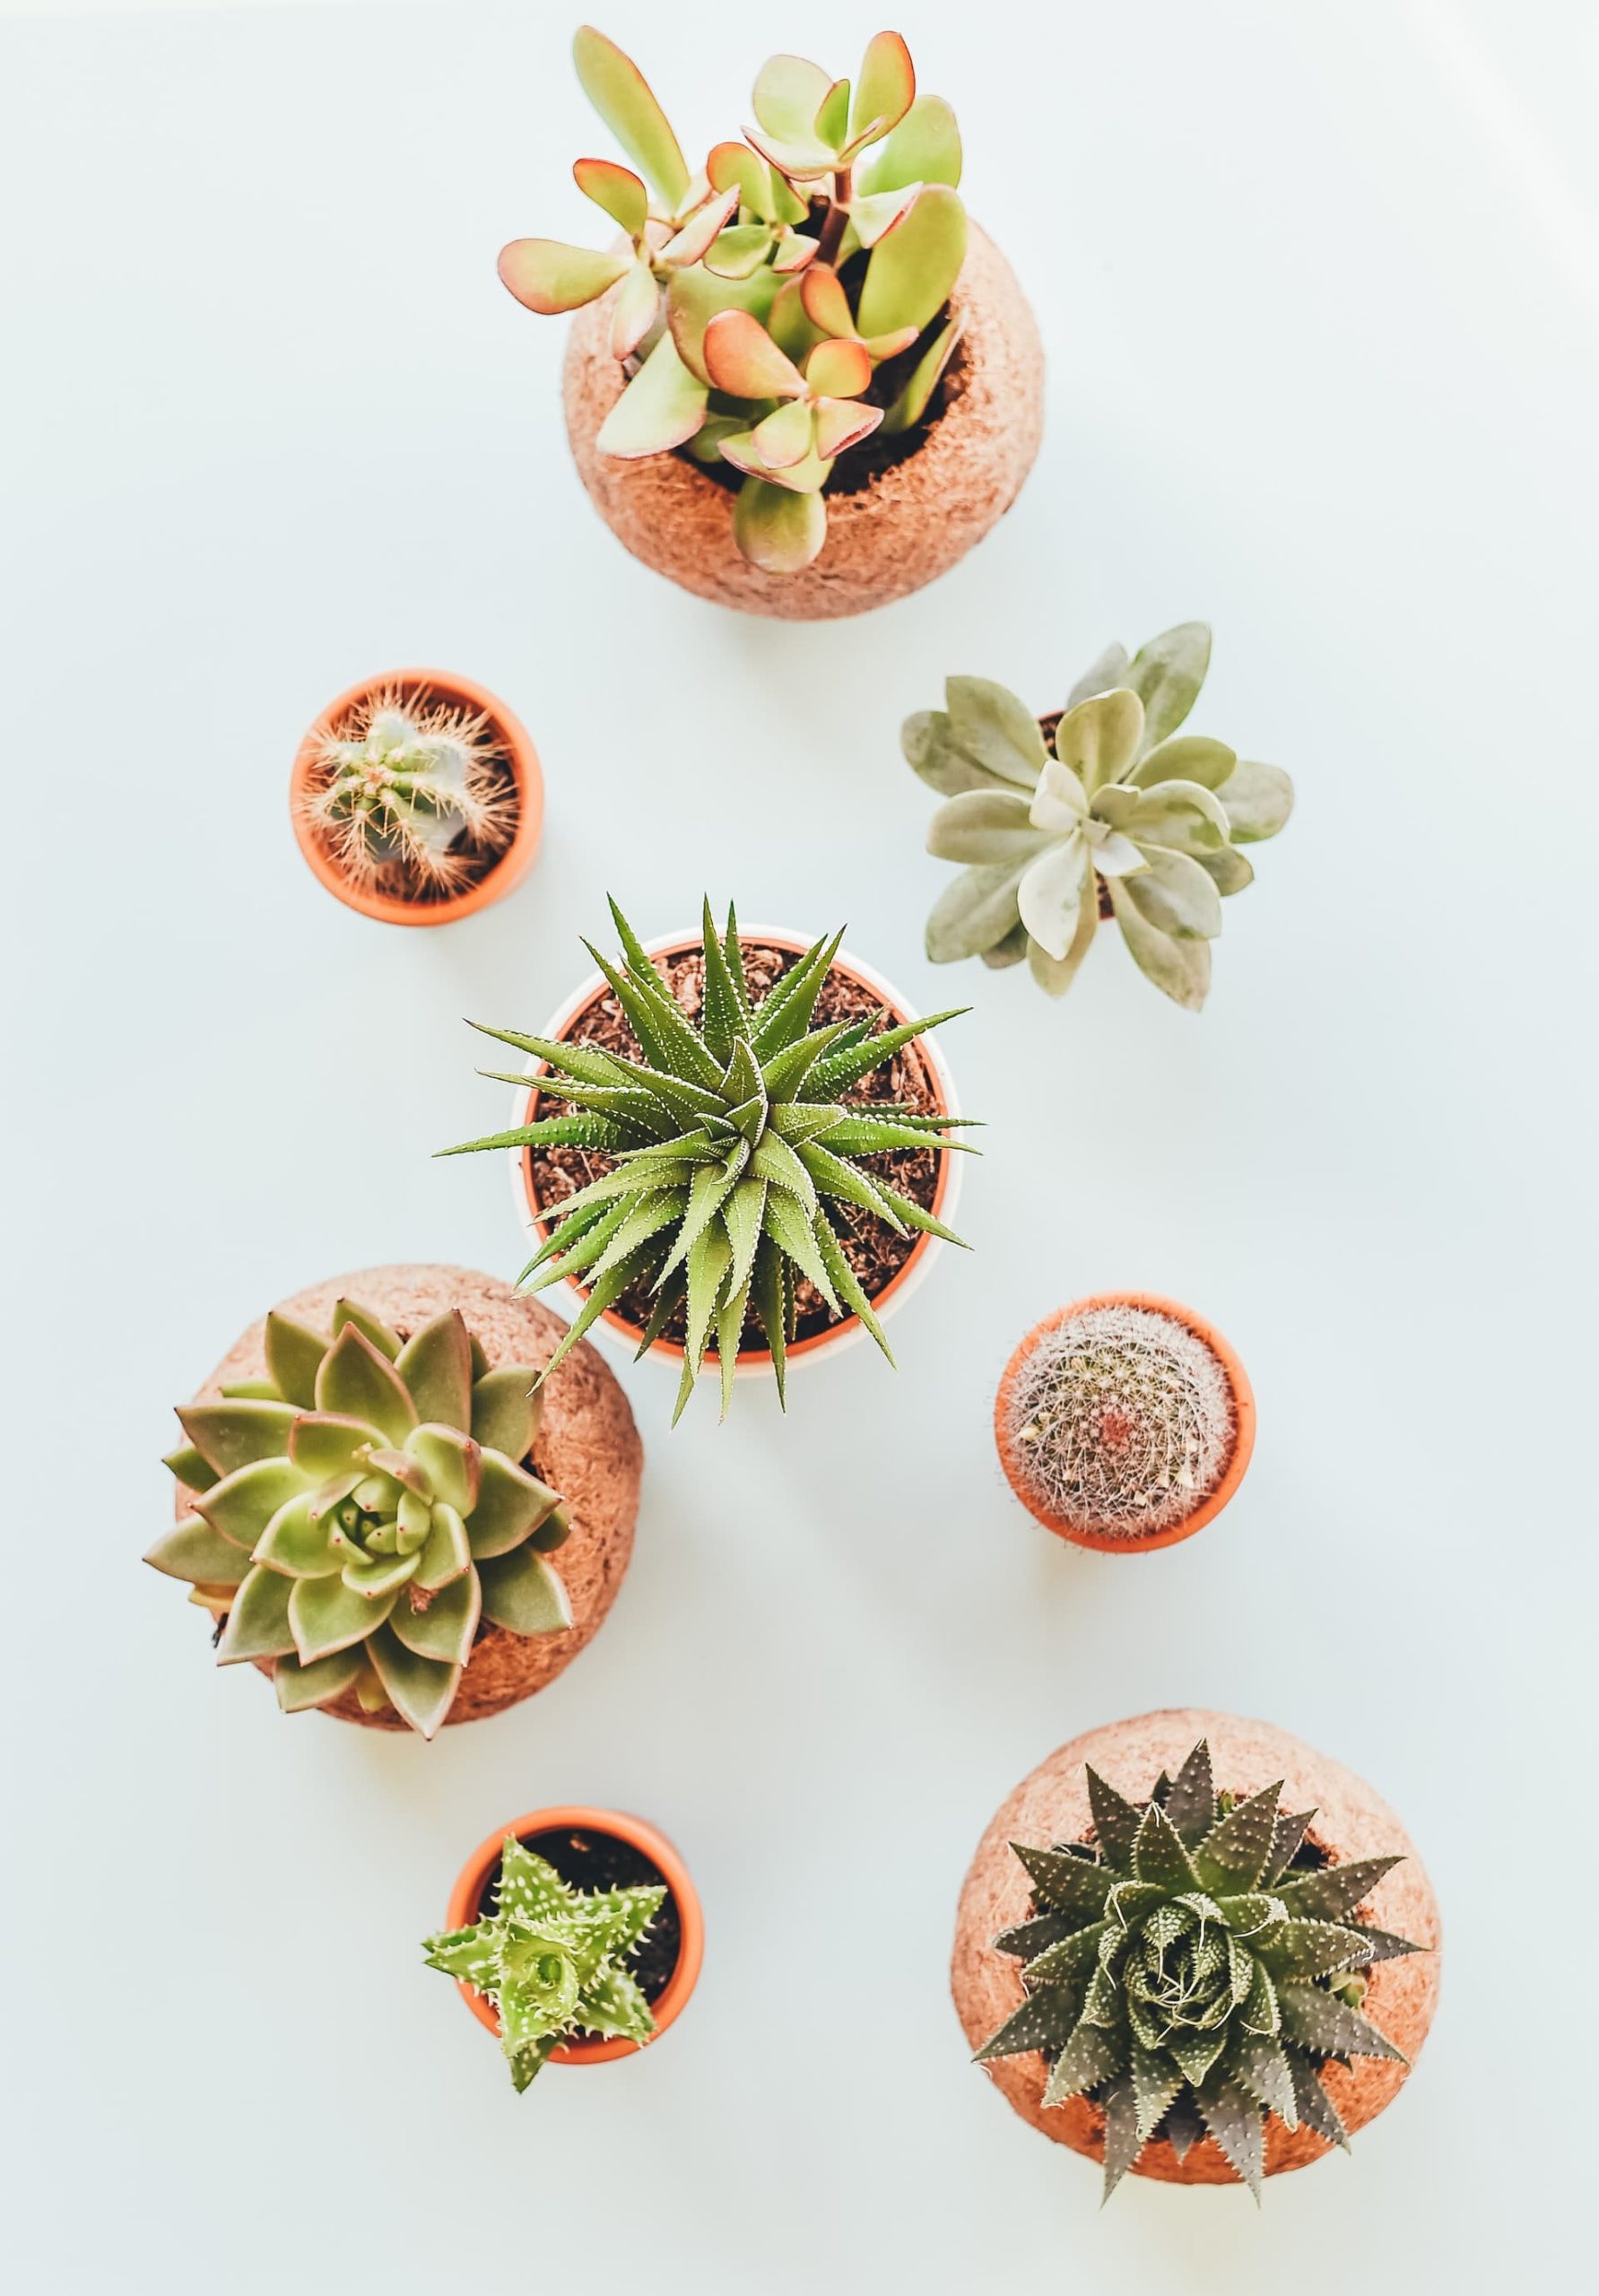 Image of a table with air plants and succulents on it. Your family can feel connected again with the help of therapy for teens in Los Angeles, CA. When your teen works with a teen therapist in Los Angeles, CA, your whole family benefits. | 90504 | 90505 |